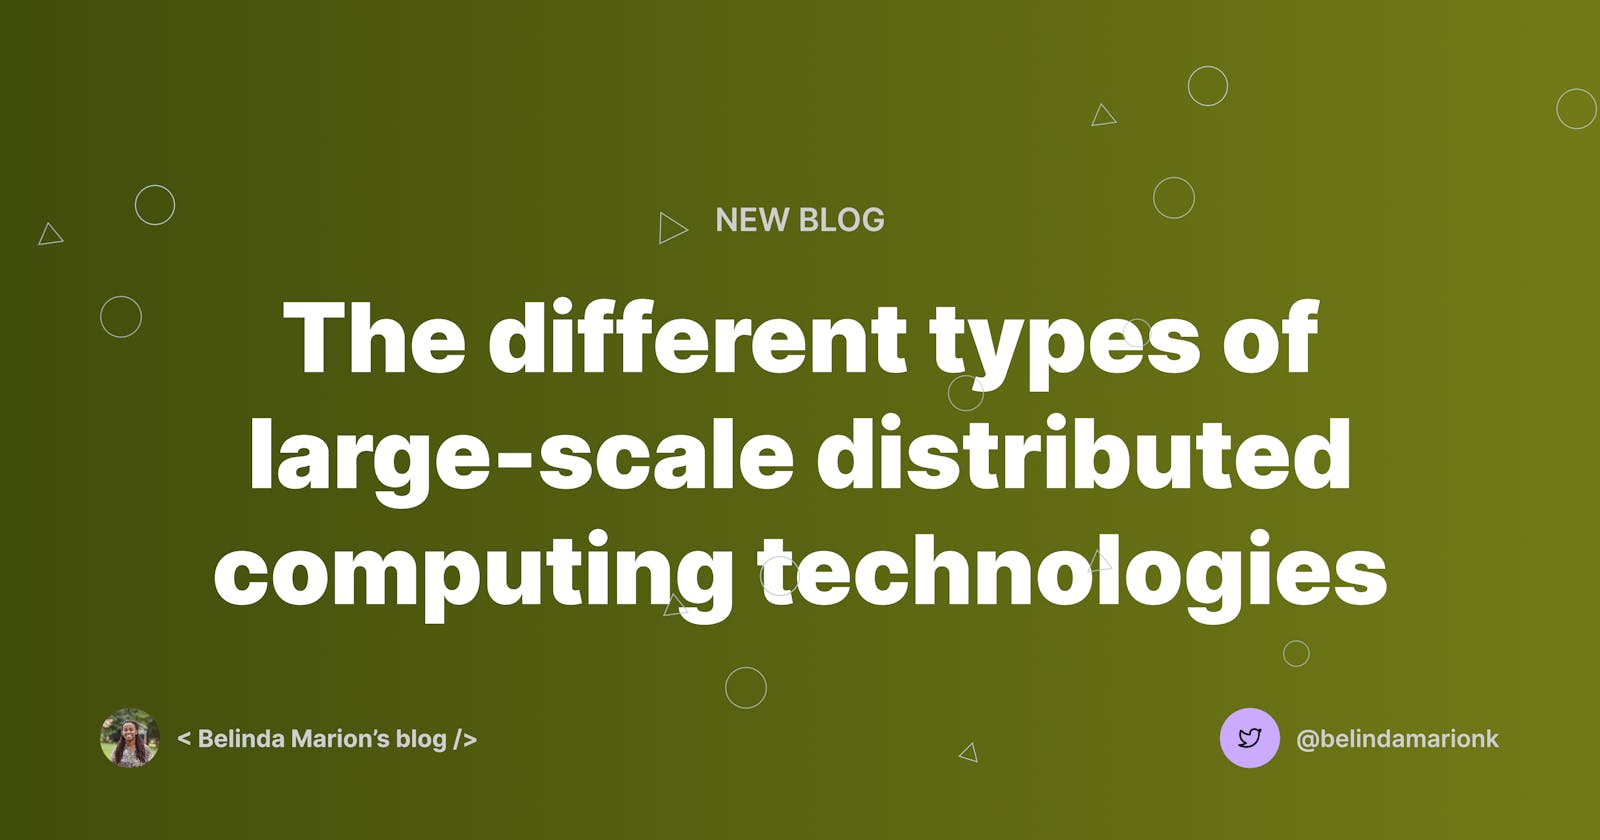 The different types of large-scale distributed computing technologies